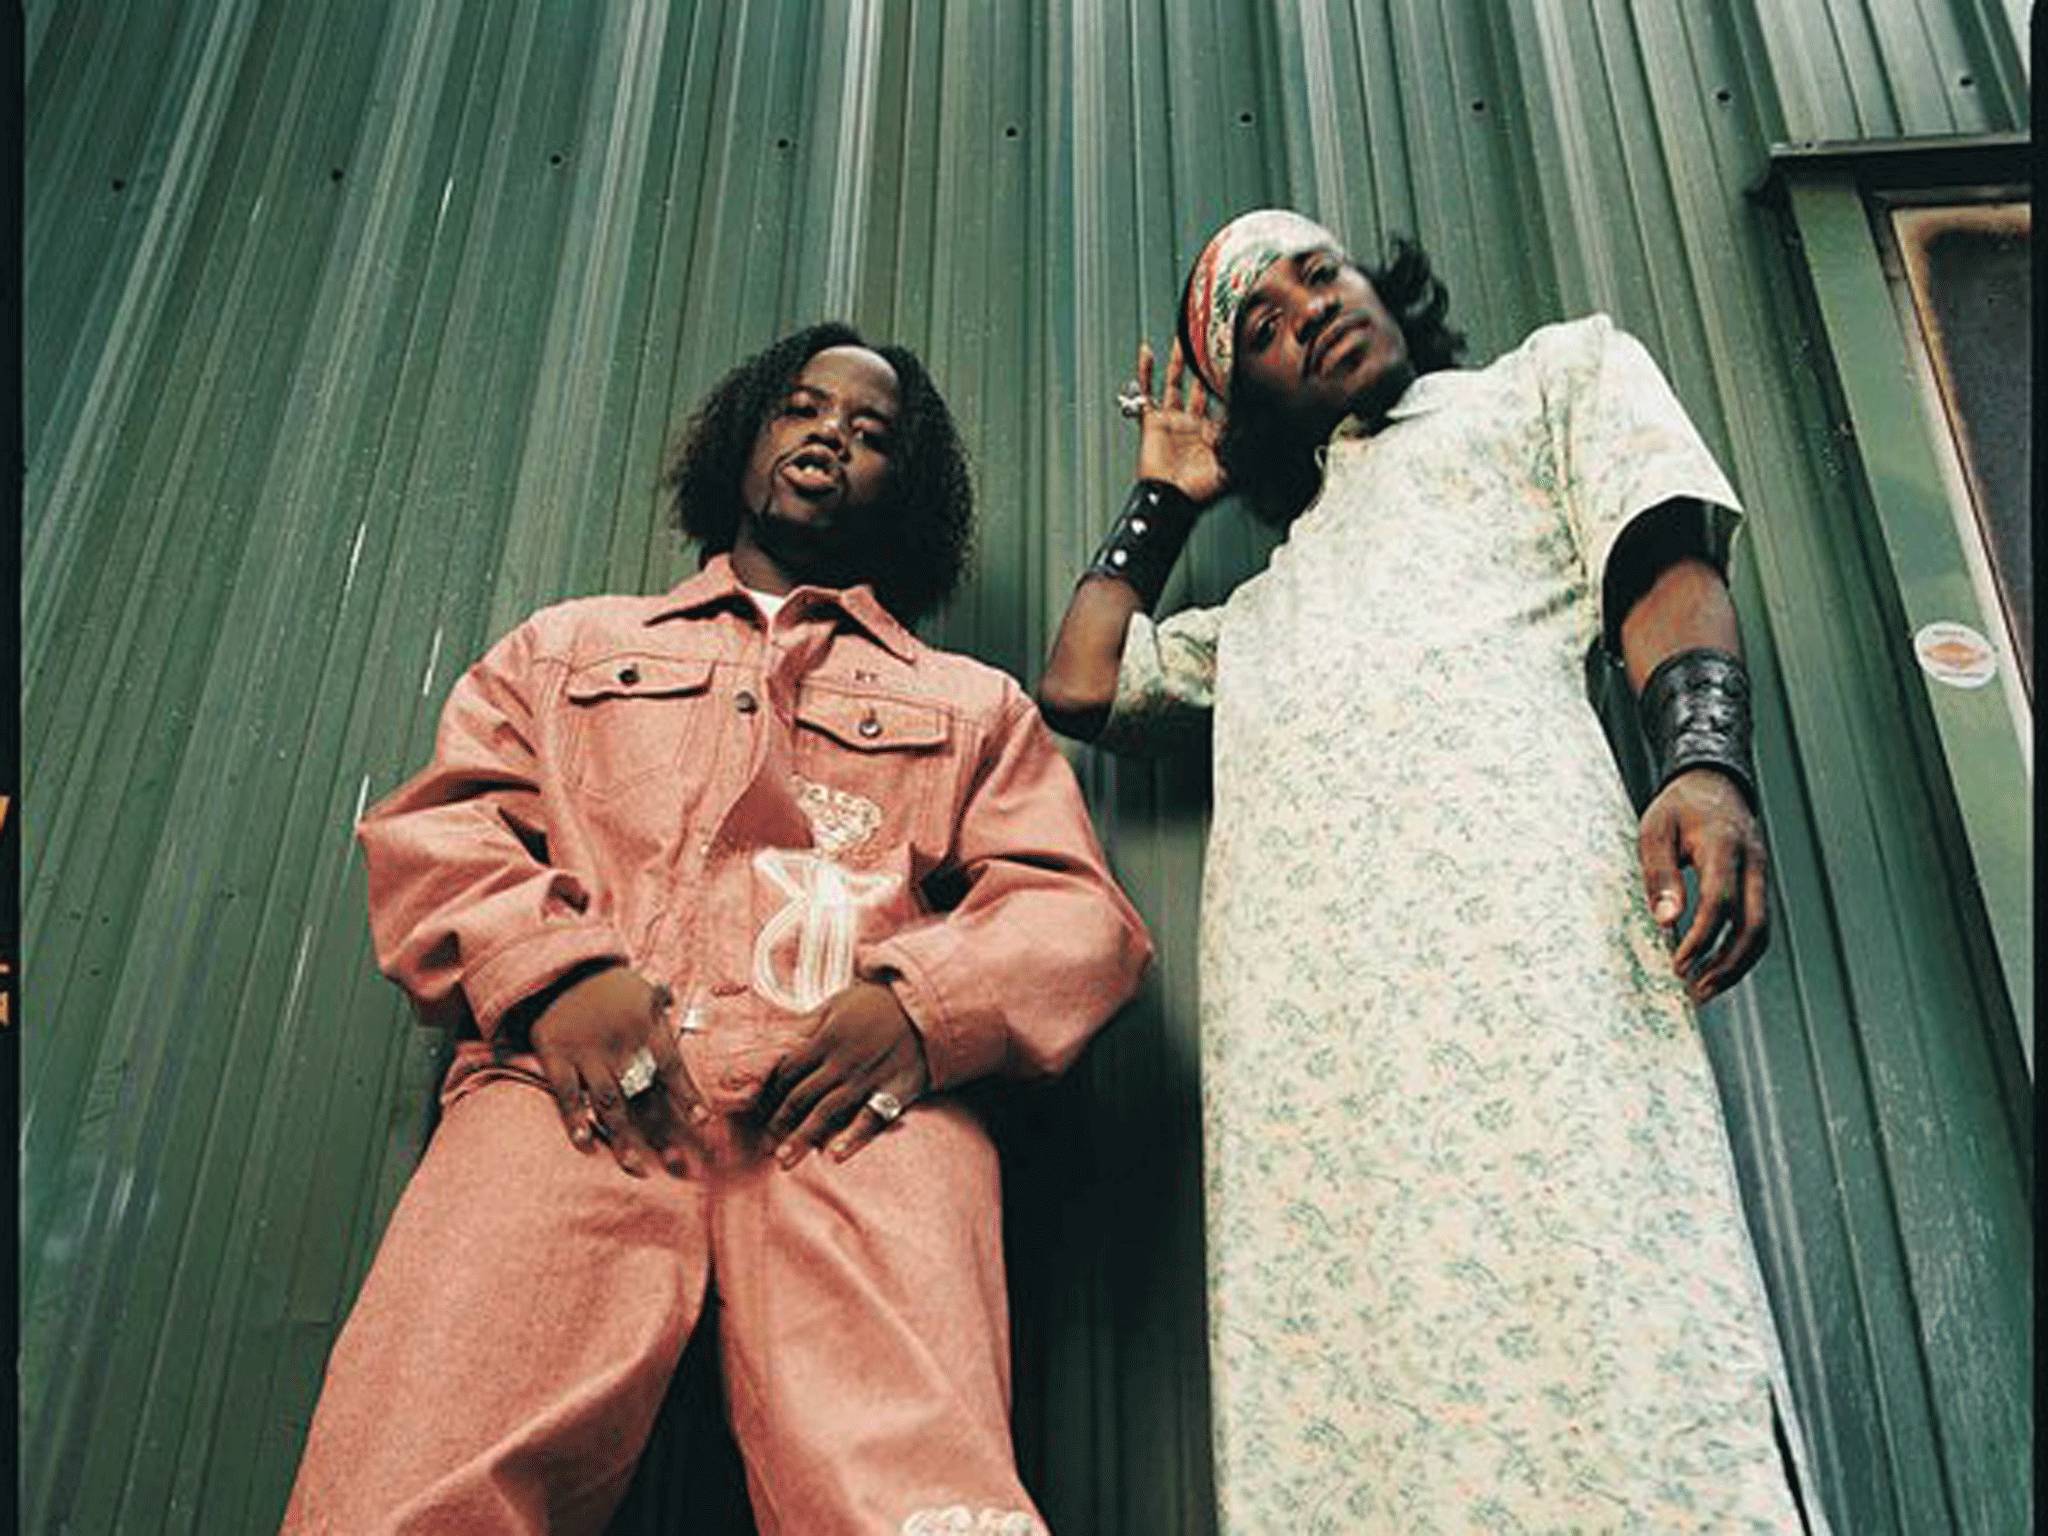 Outkast are already confirmed to headline Coachella